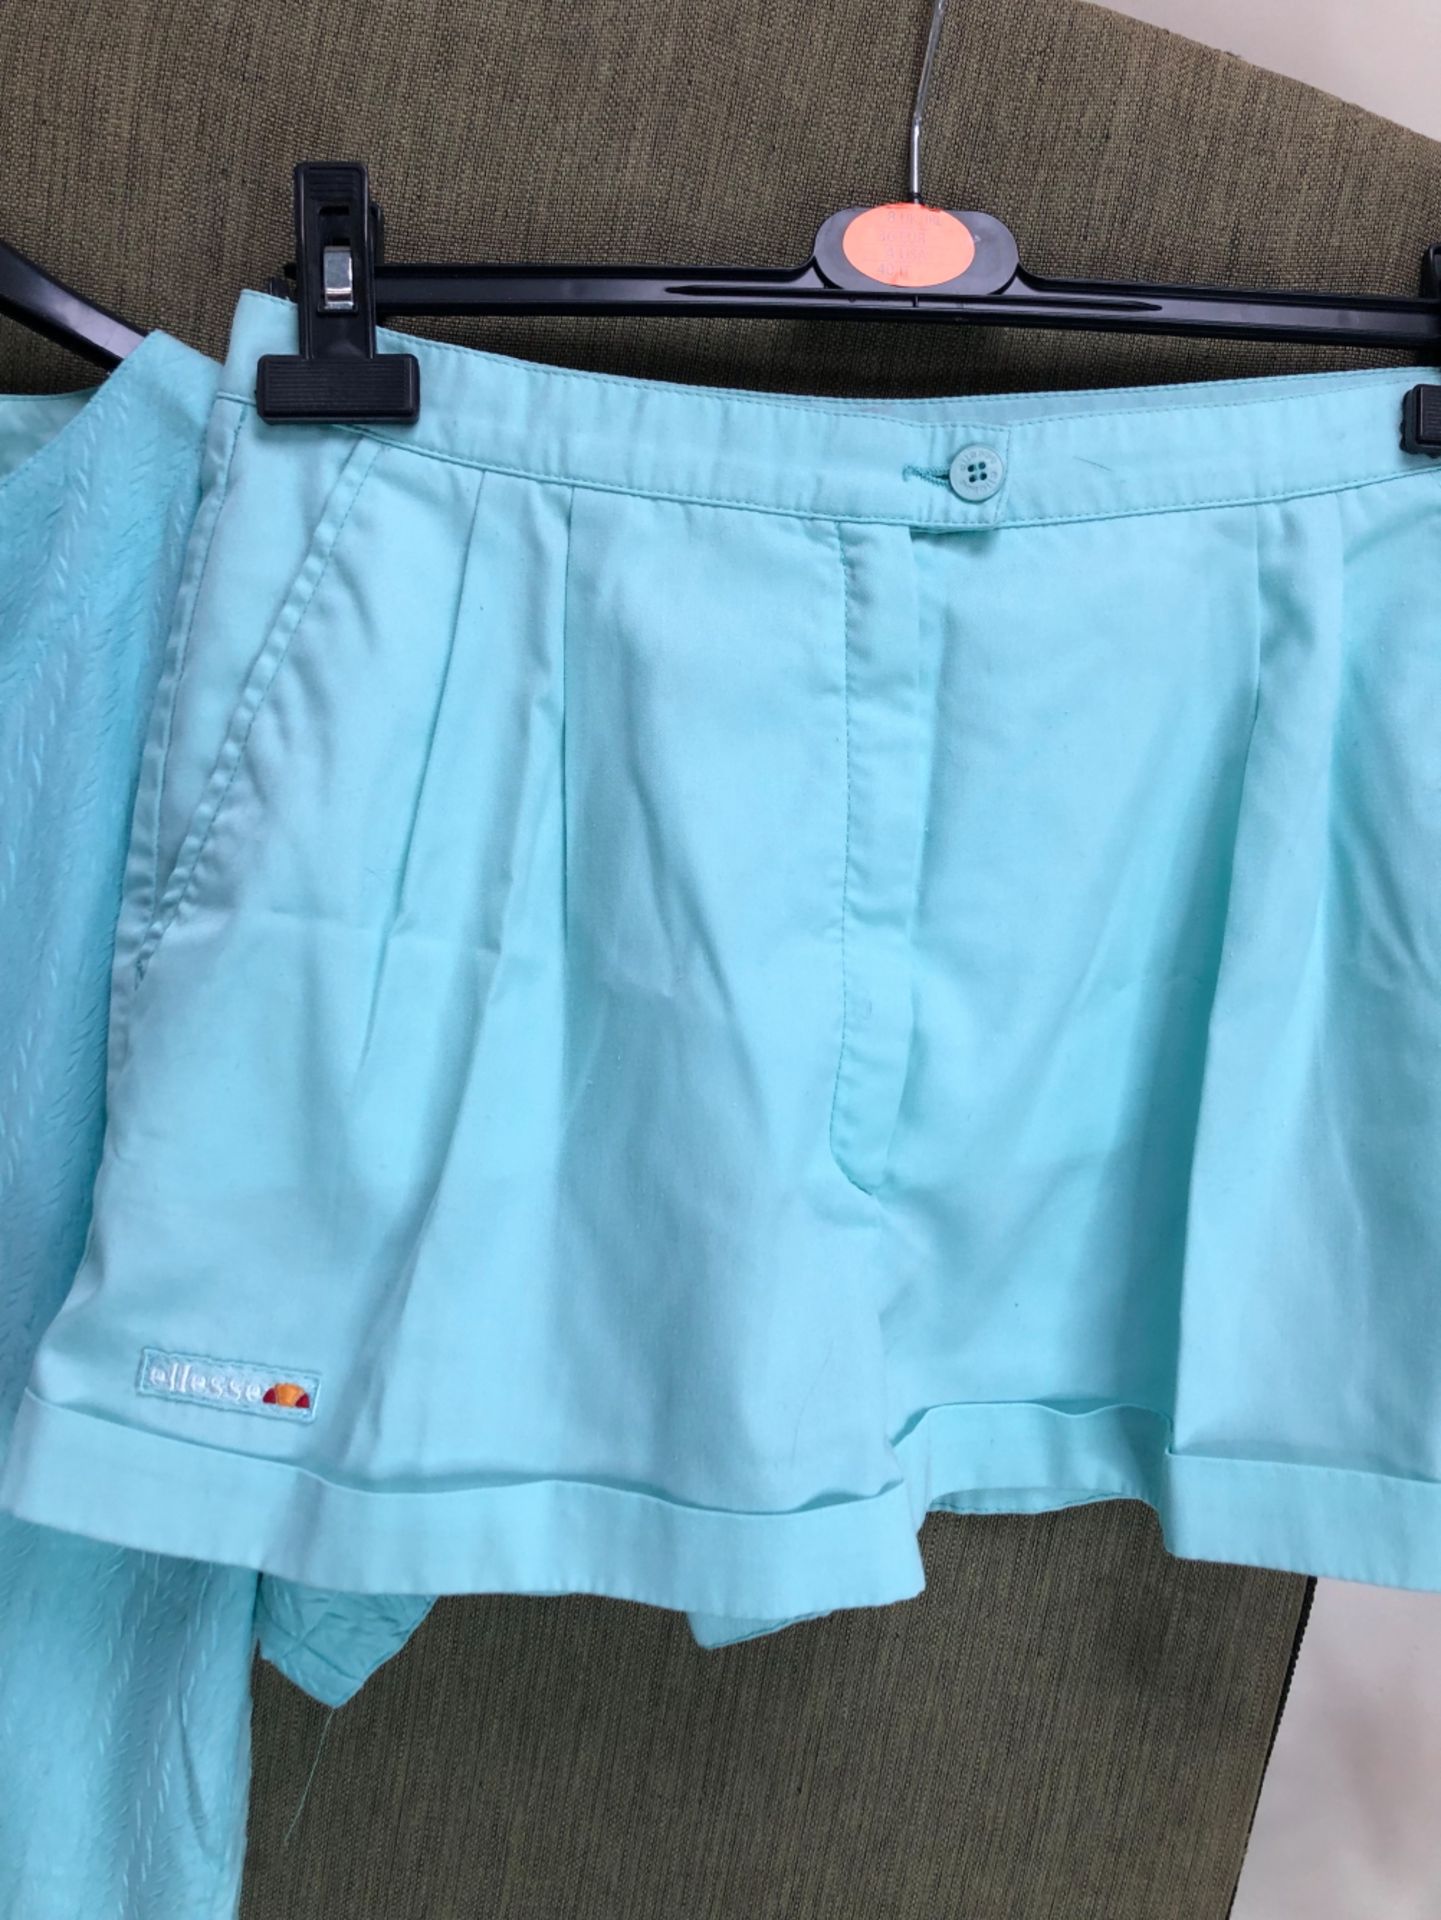 A MINT GREEN ELLESSE T-SHIRT SIZE USA 10W AND SHORTS USA 12, TOGETHER WITH A 100% COTTON MATCHING - Bild 9 aus 9